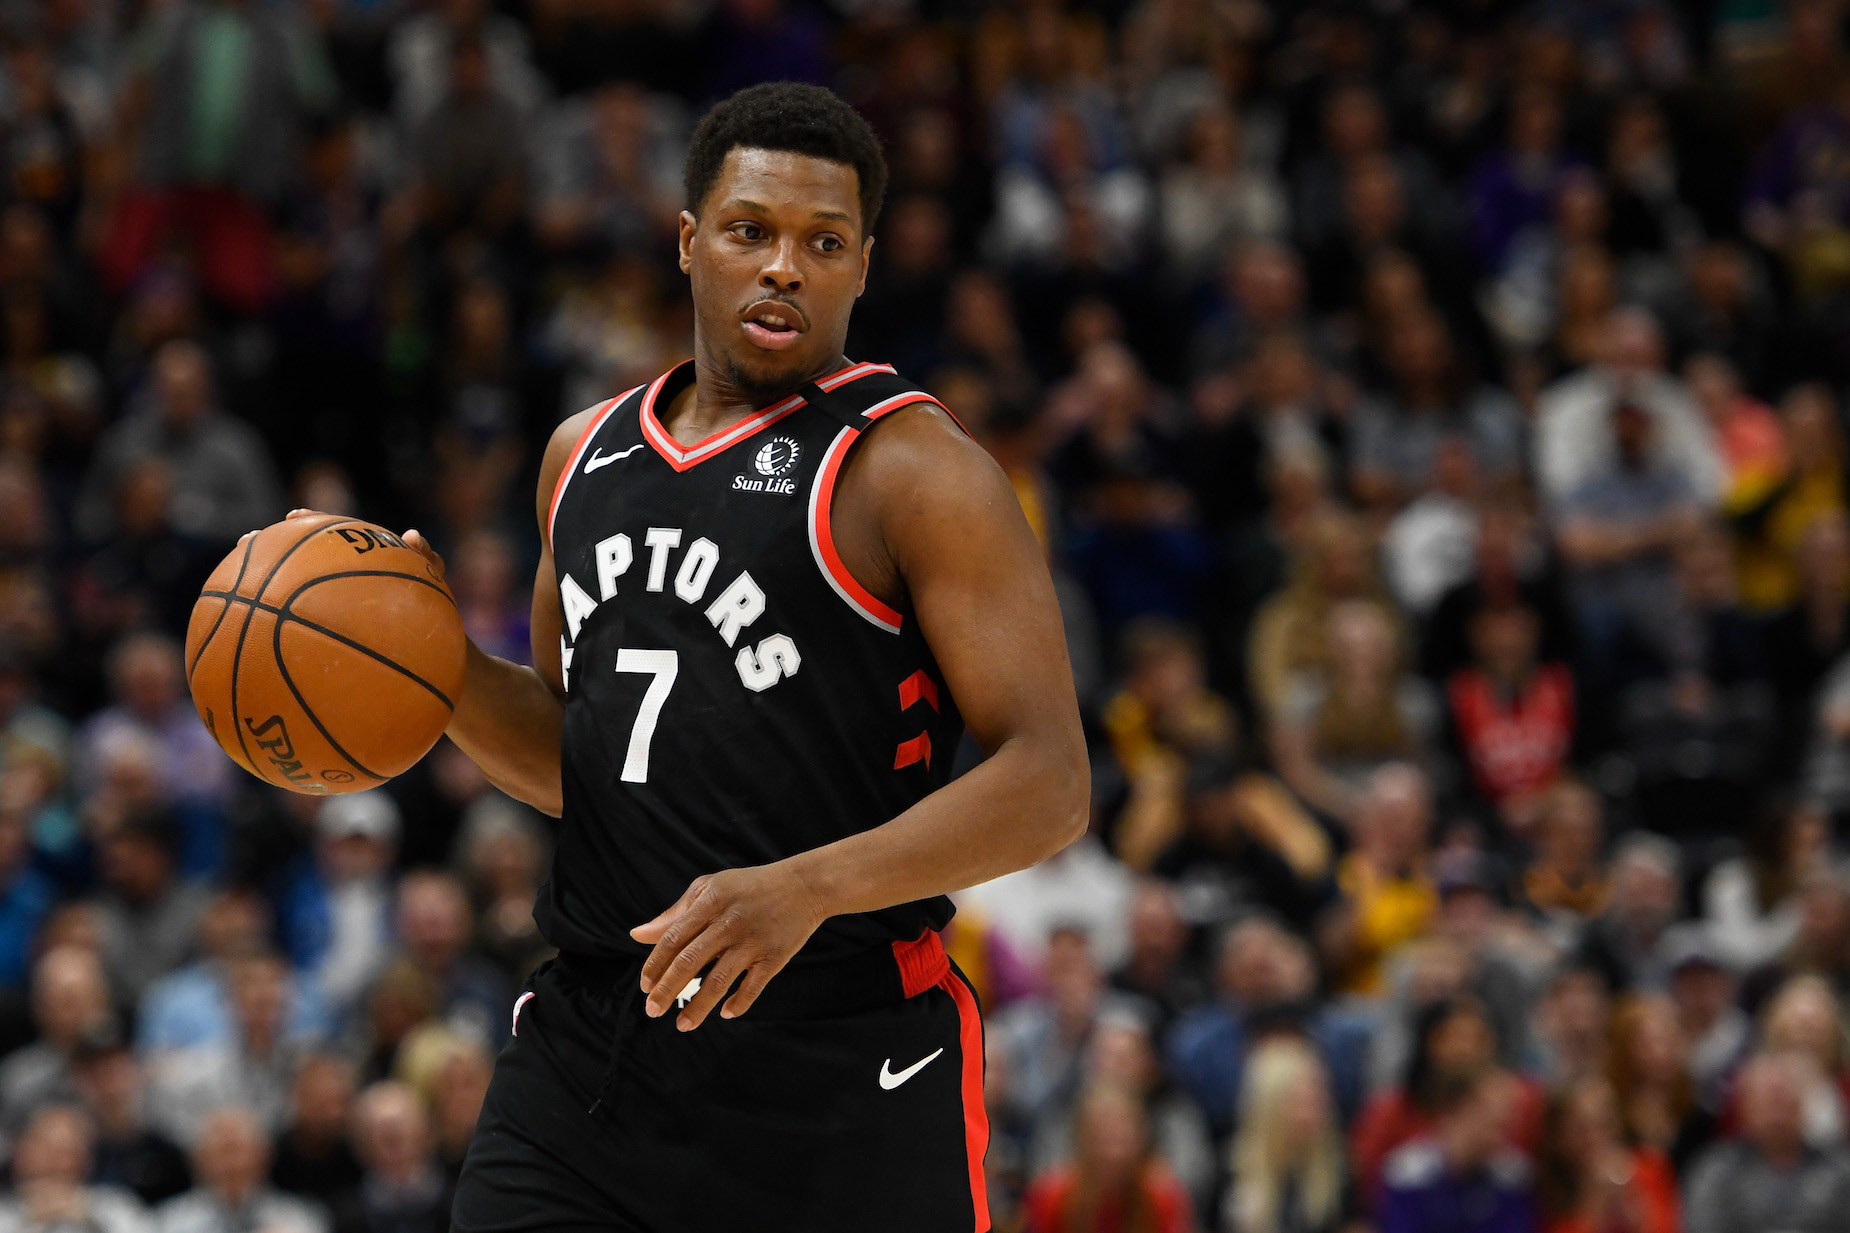 Kyle Lowry has built up a $55 million net worth and used that money to help Villanova.